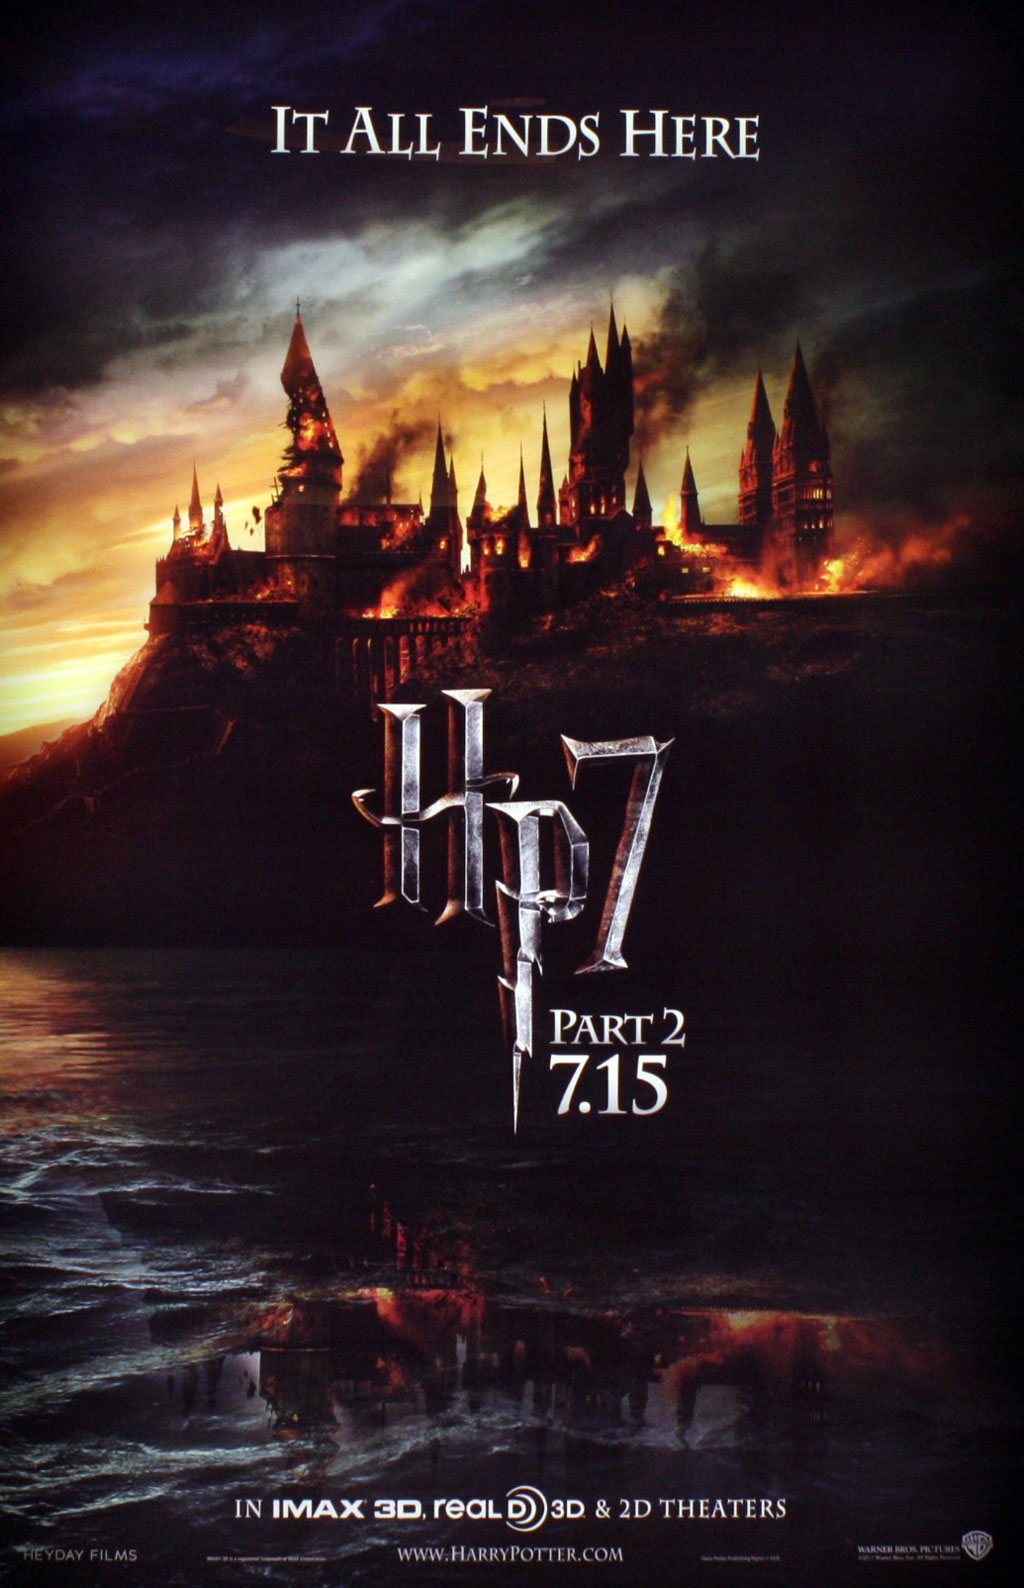 Harry Potter And The Deathly Hallows: Part 2 #3